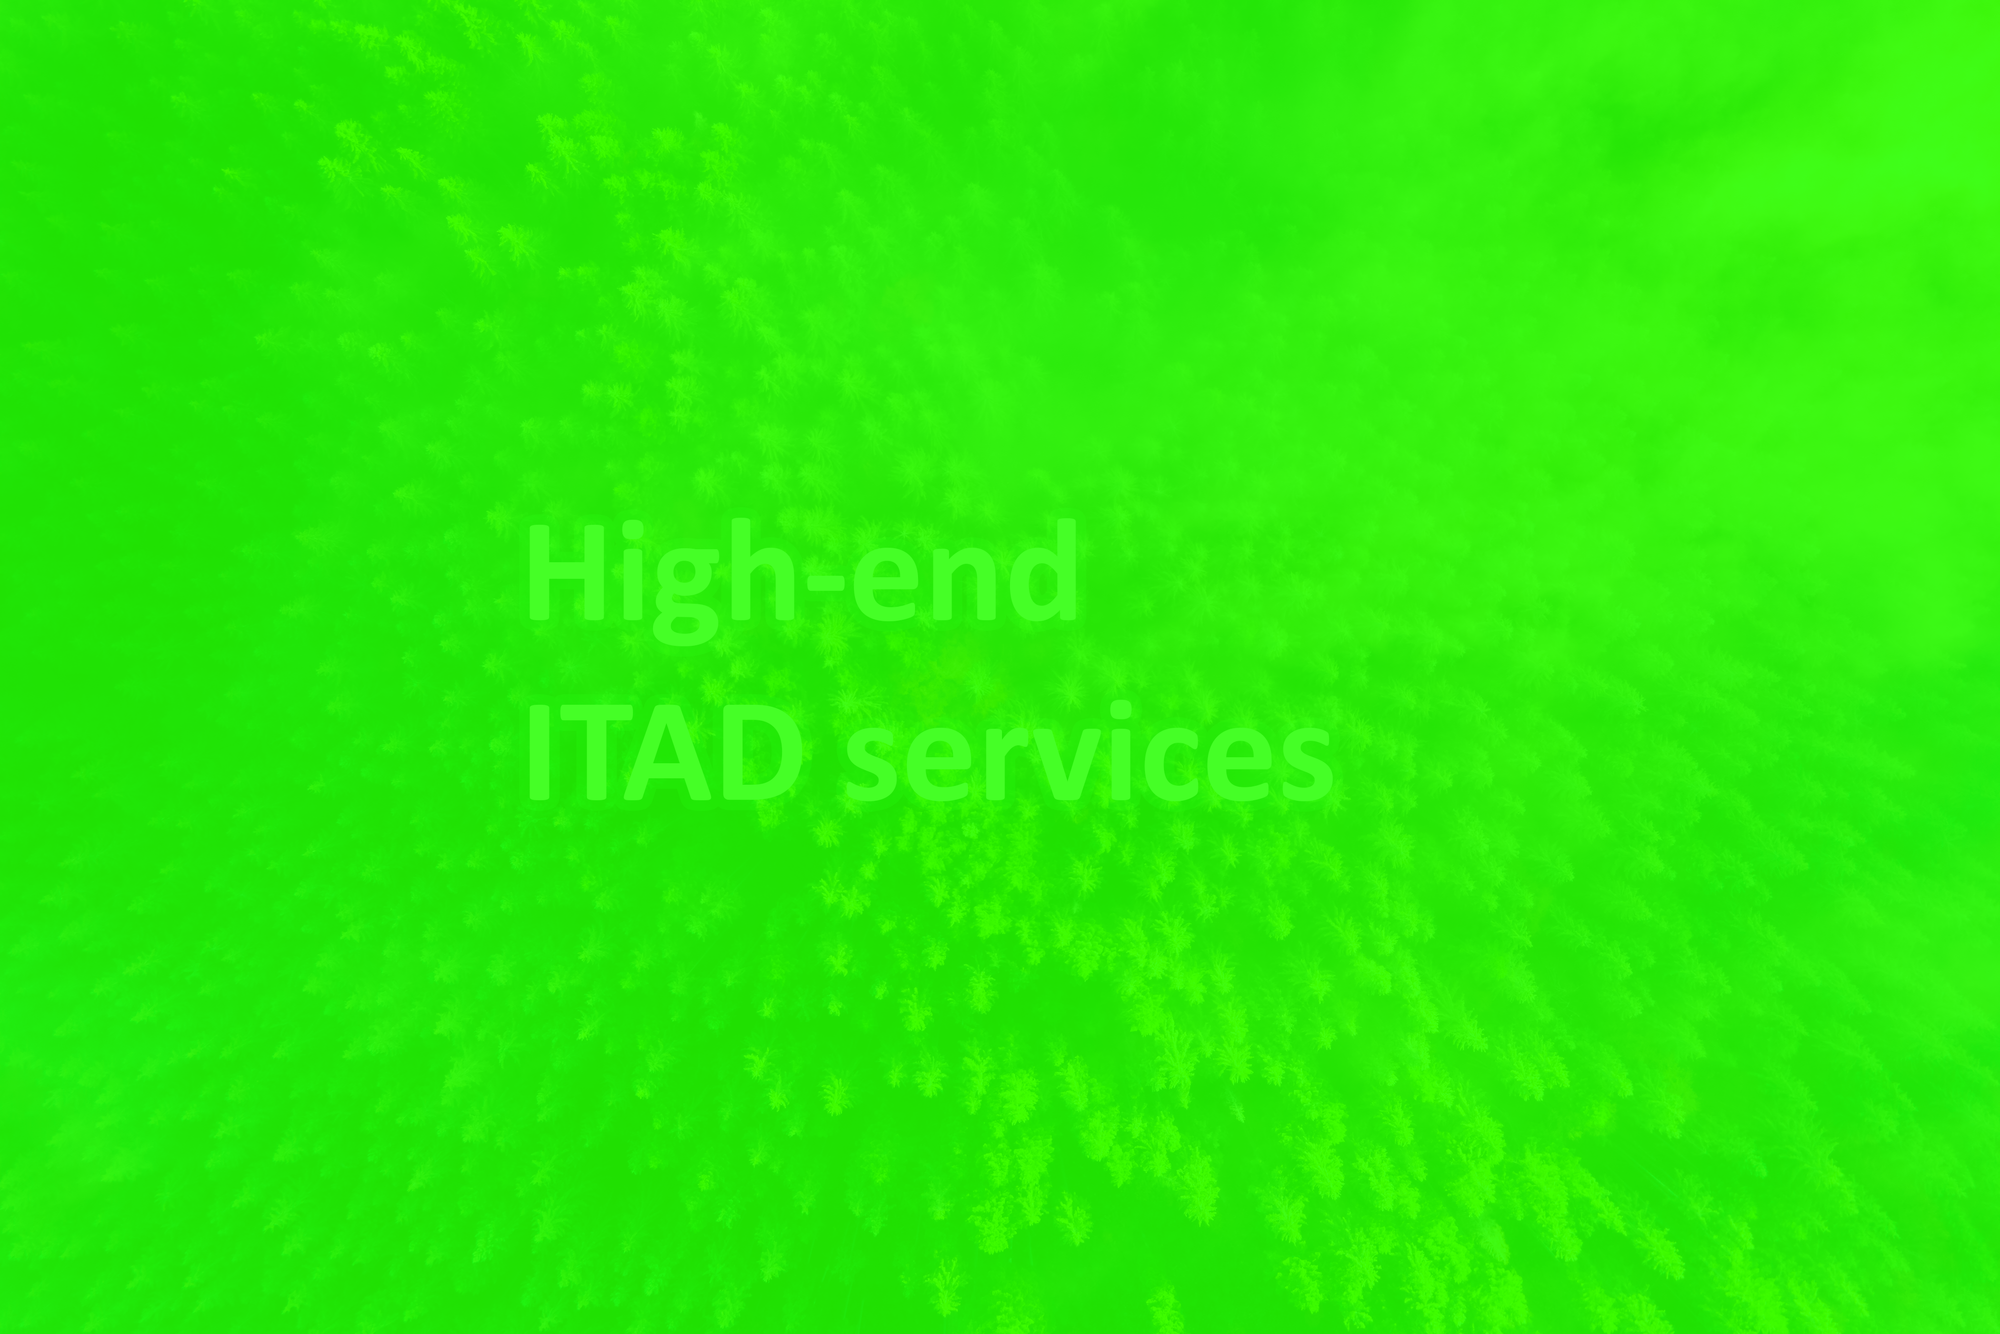 High-end ITAD services with supply chain ownership